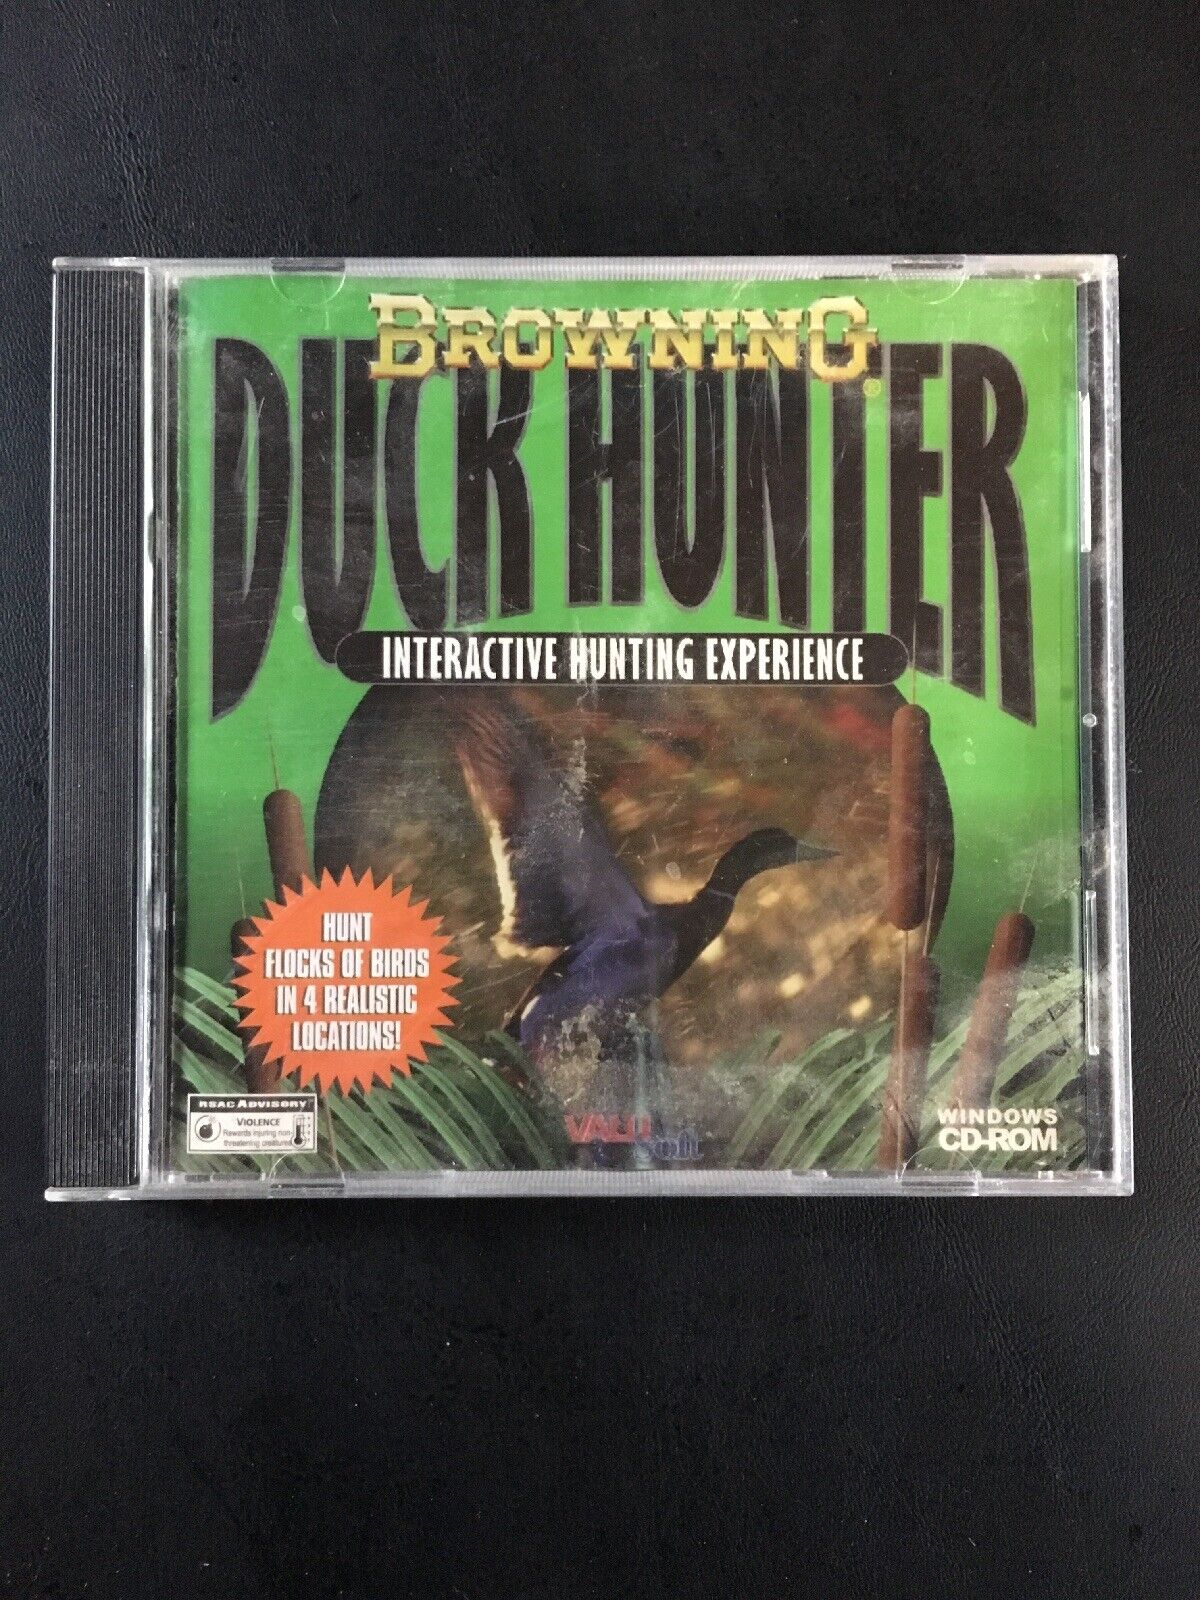 BROWNING DUCK HUNTER PC GAME Fast Shipping